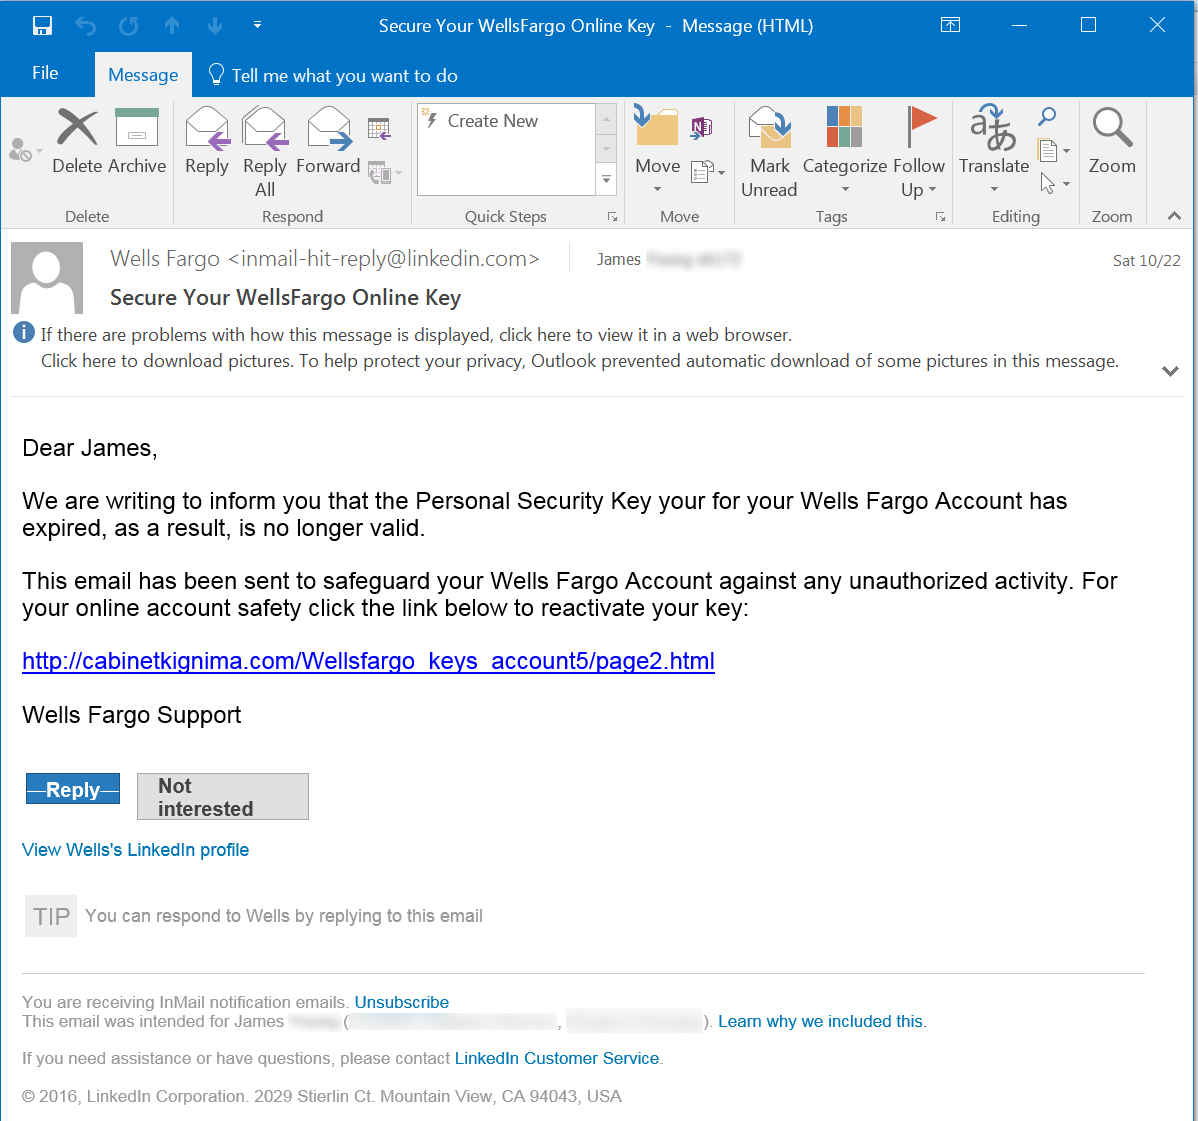 Fake Roblox Scam Email Sent To Someone On Twitter : r/engrish